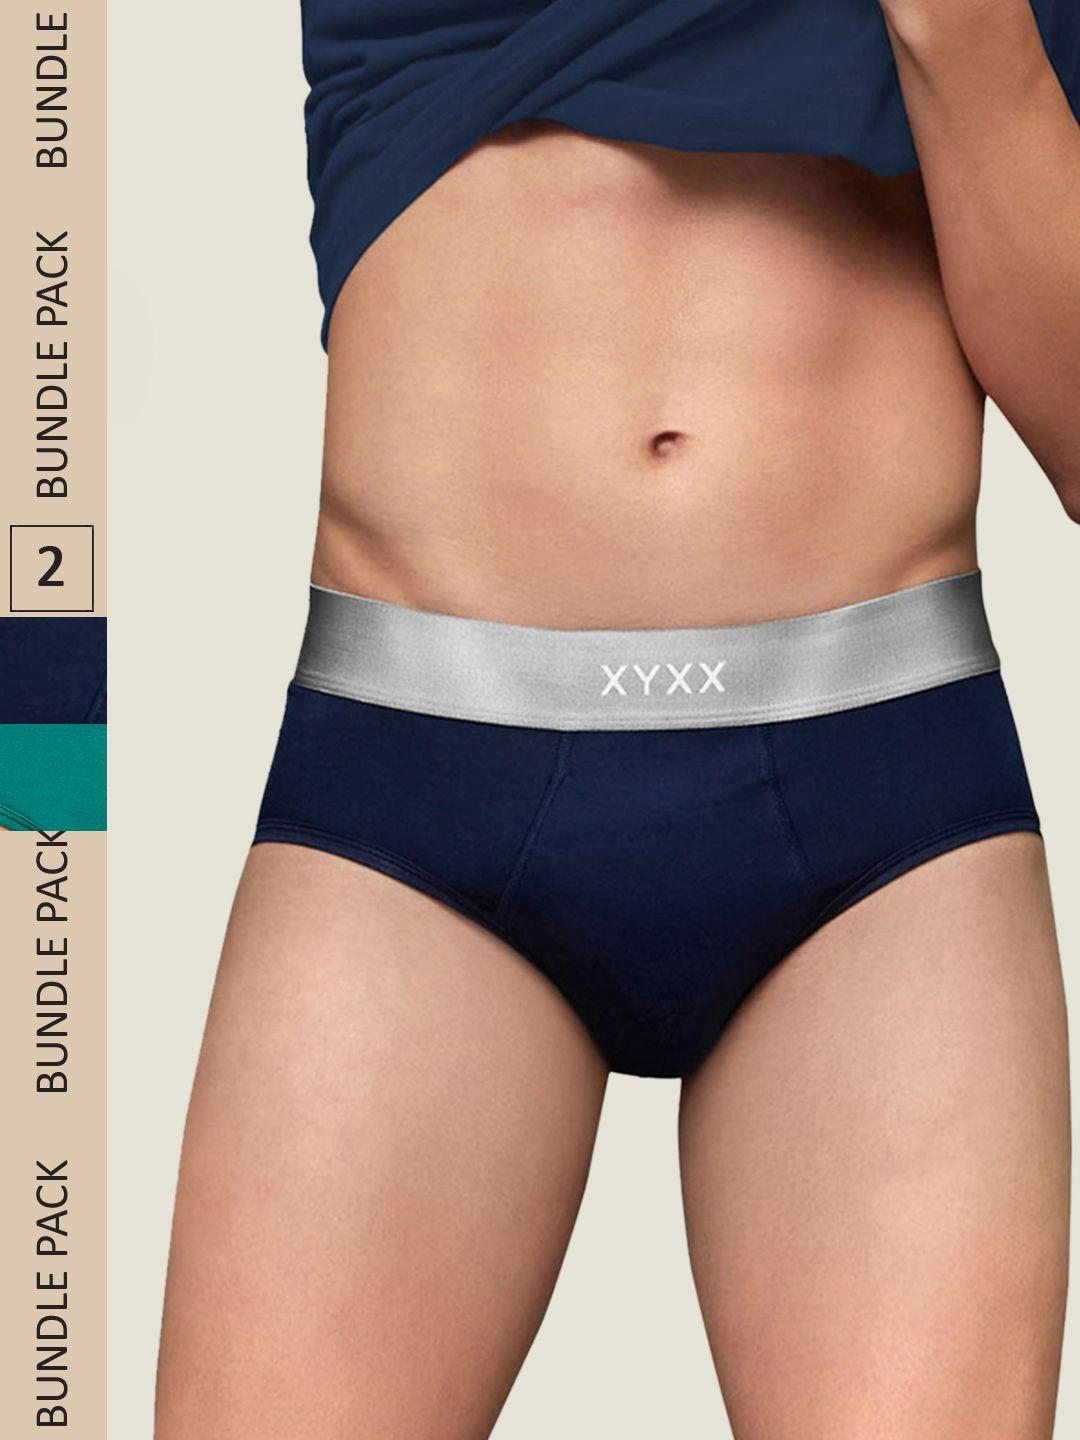 xyxx-men-intellisoft-antimicrobial-micro-modal-pack-of-2-dualist-briefs-xybrf2pckn284